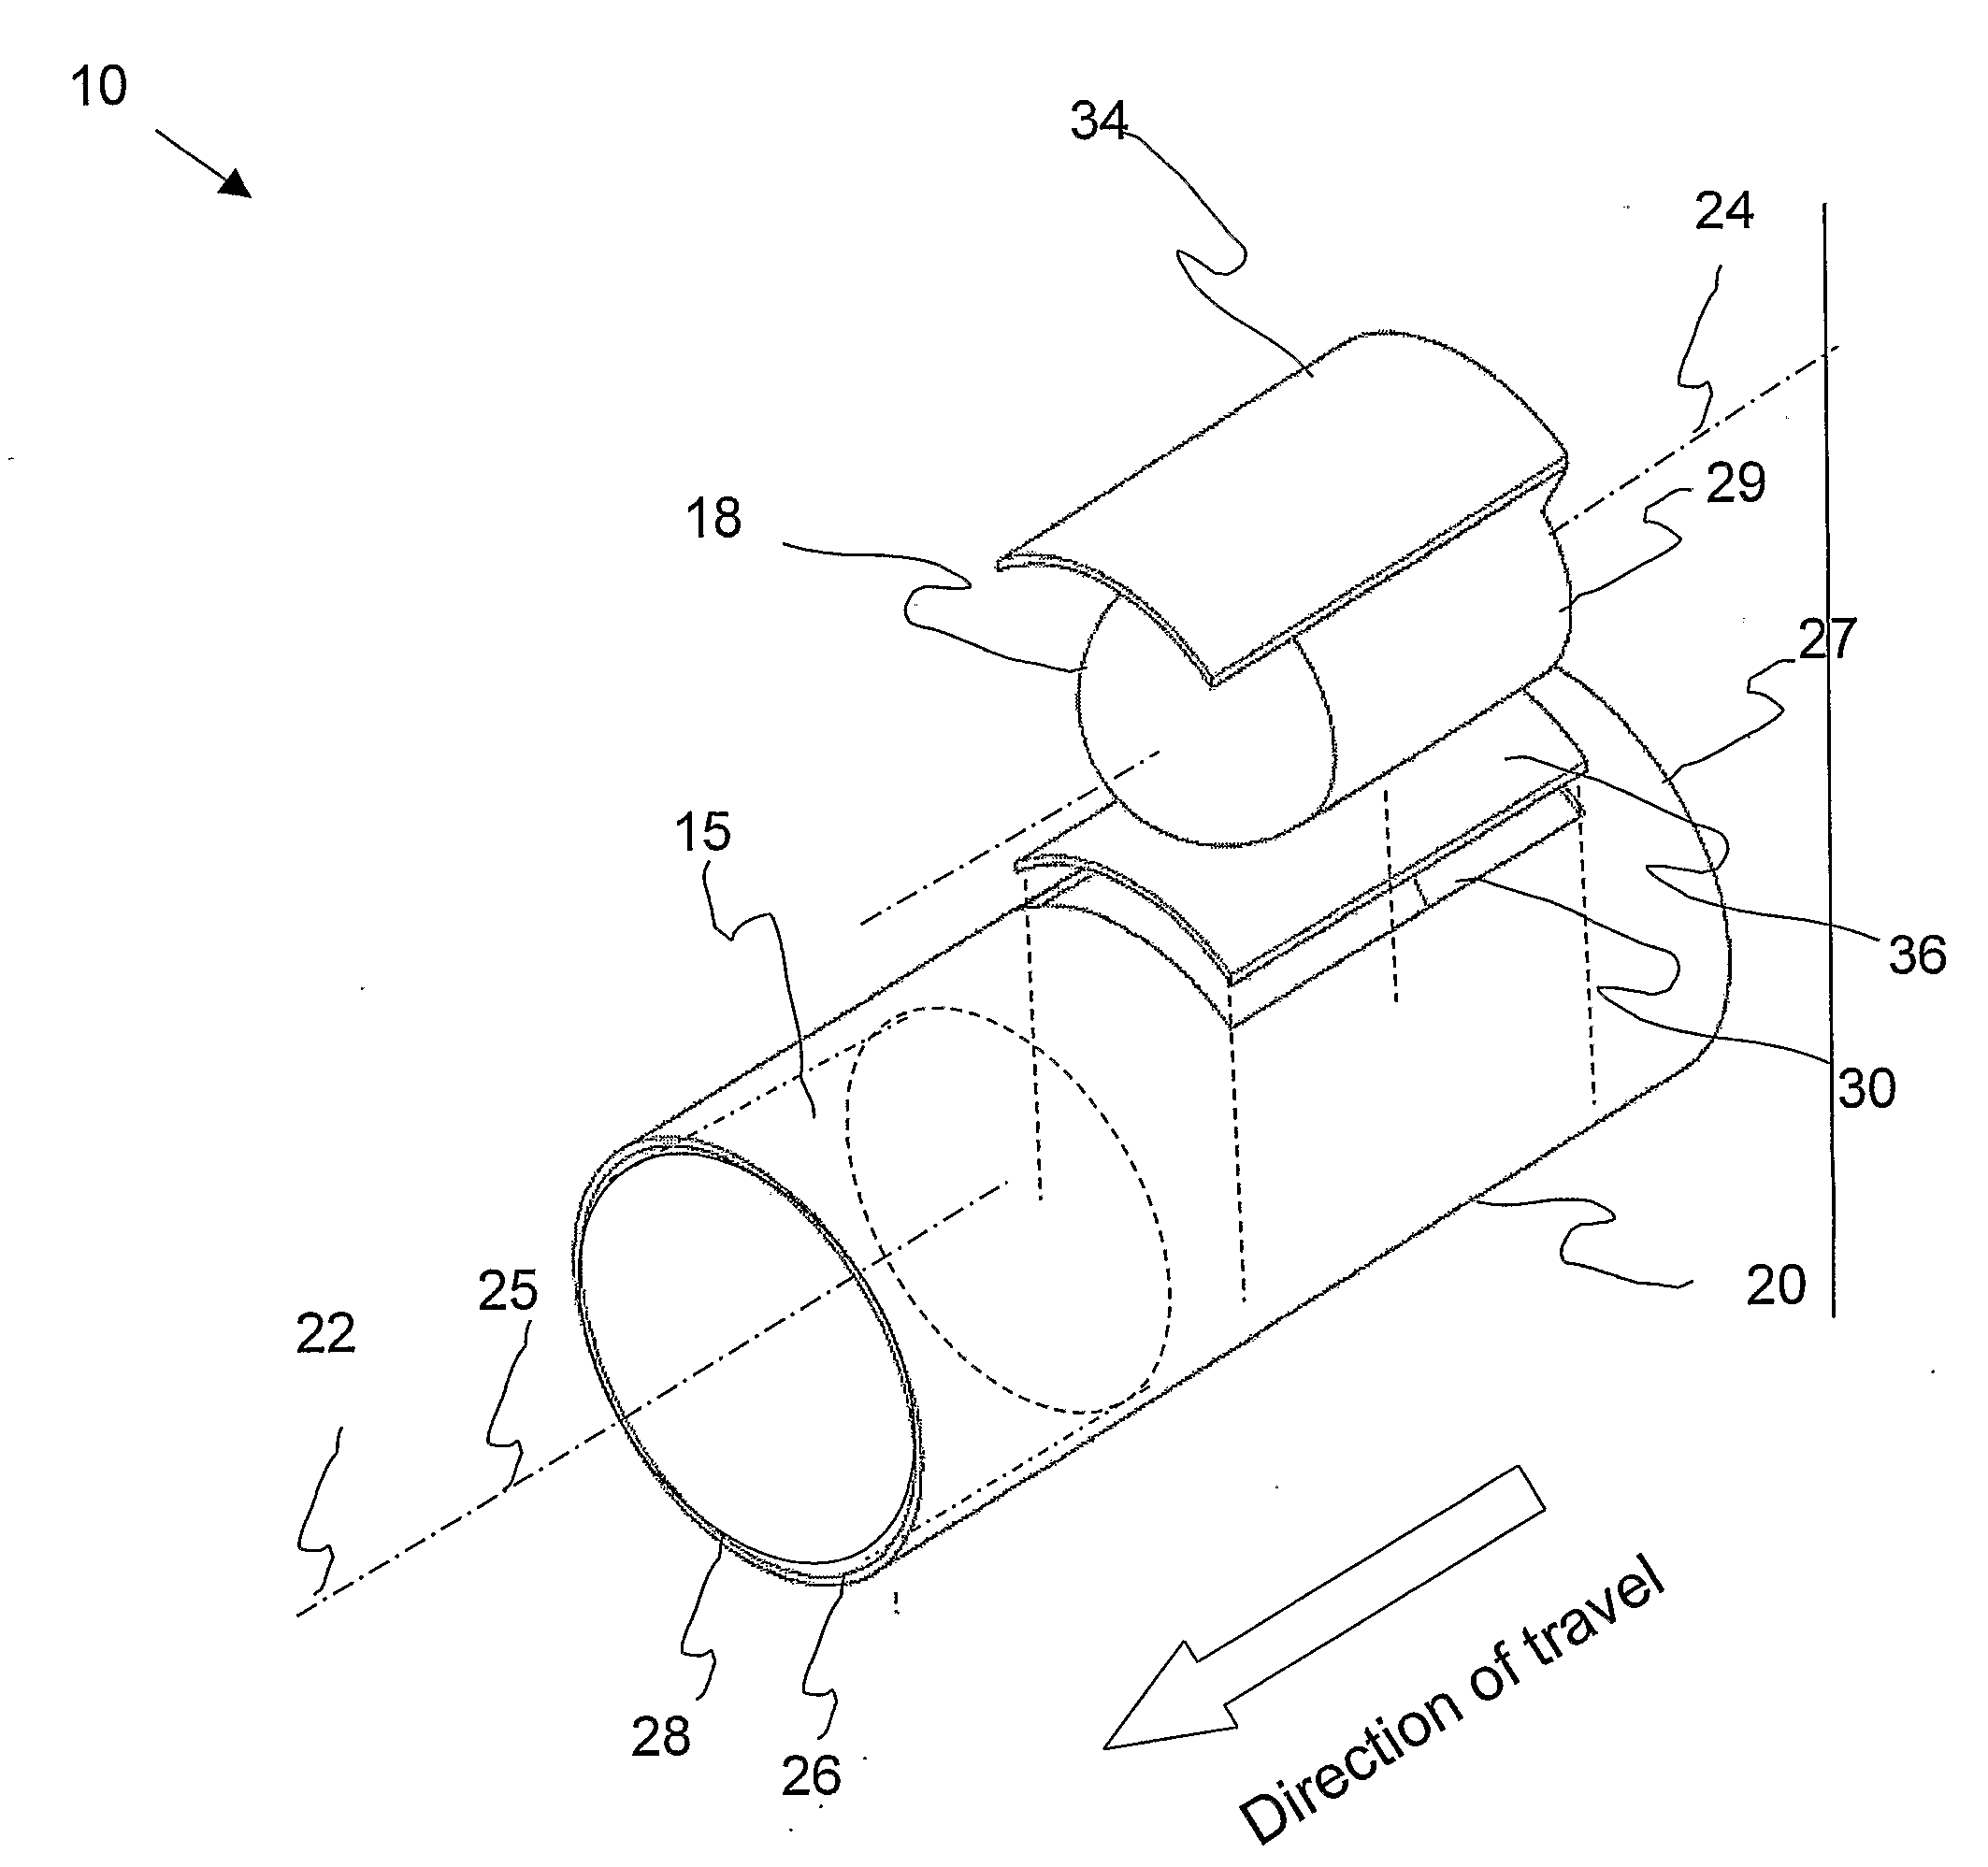 Deployable aircraft/spacecraft propulsion system and methods